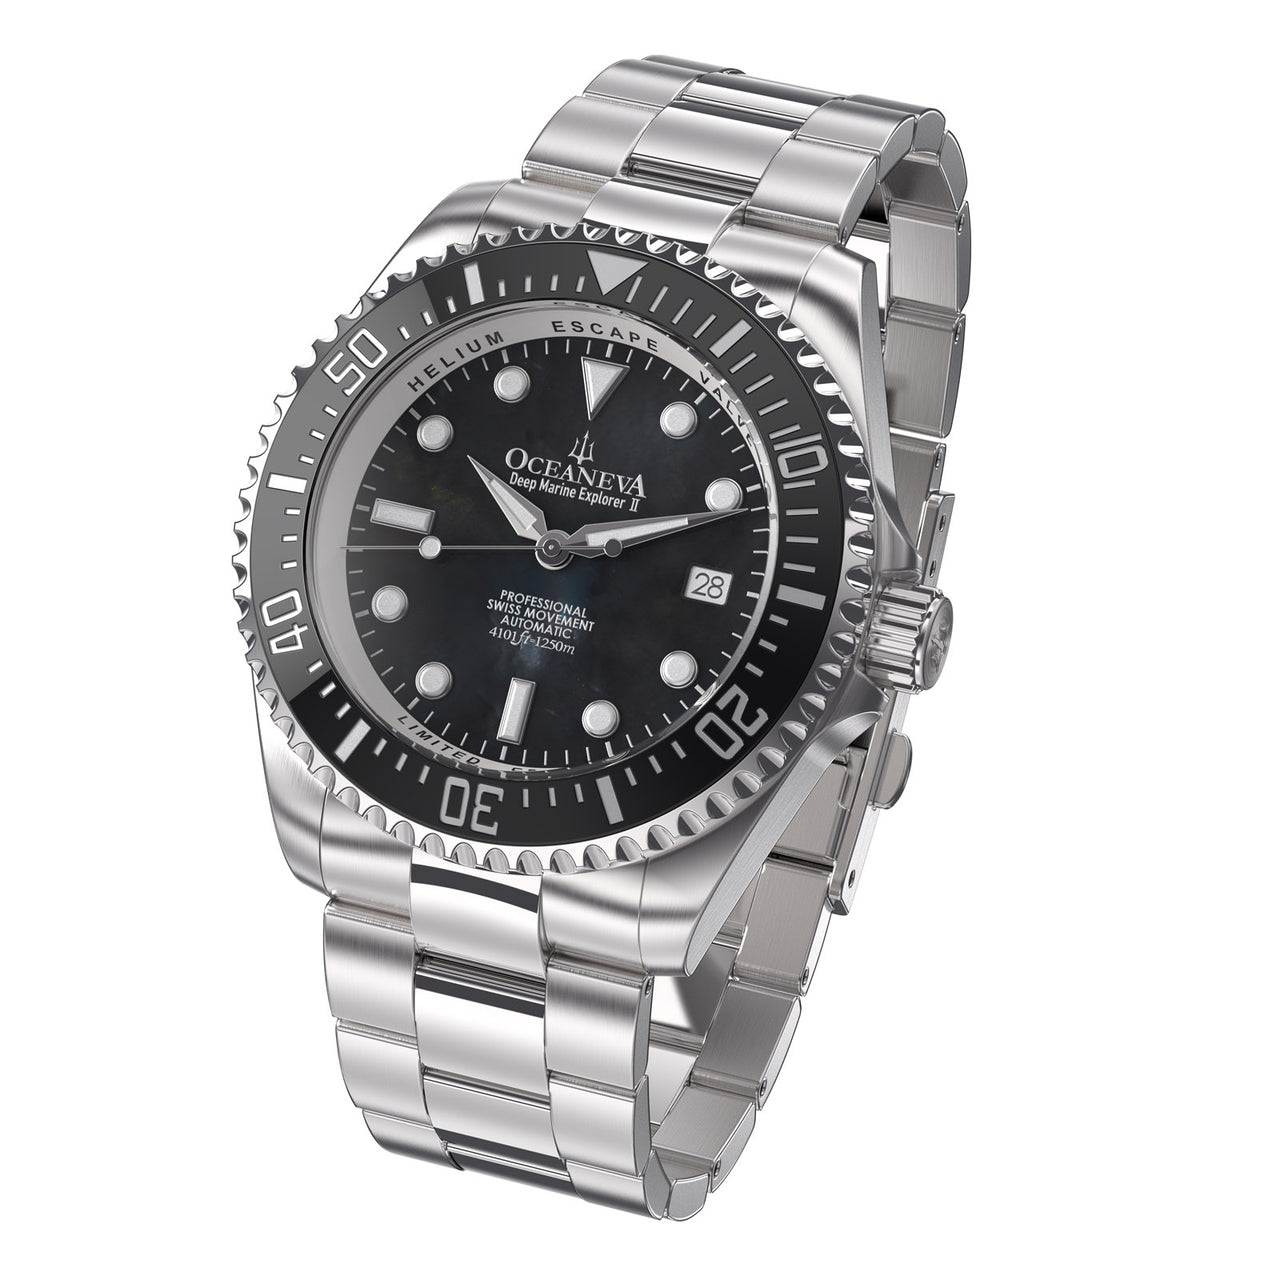 Oceaneva 1250M Dive Watch Black Mother of Pearl Front Picture Slight Left Slant View